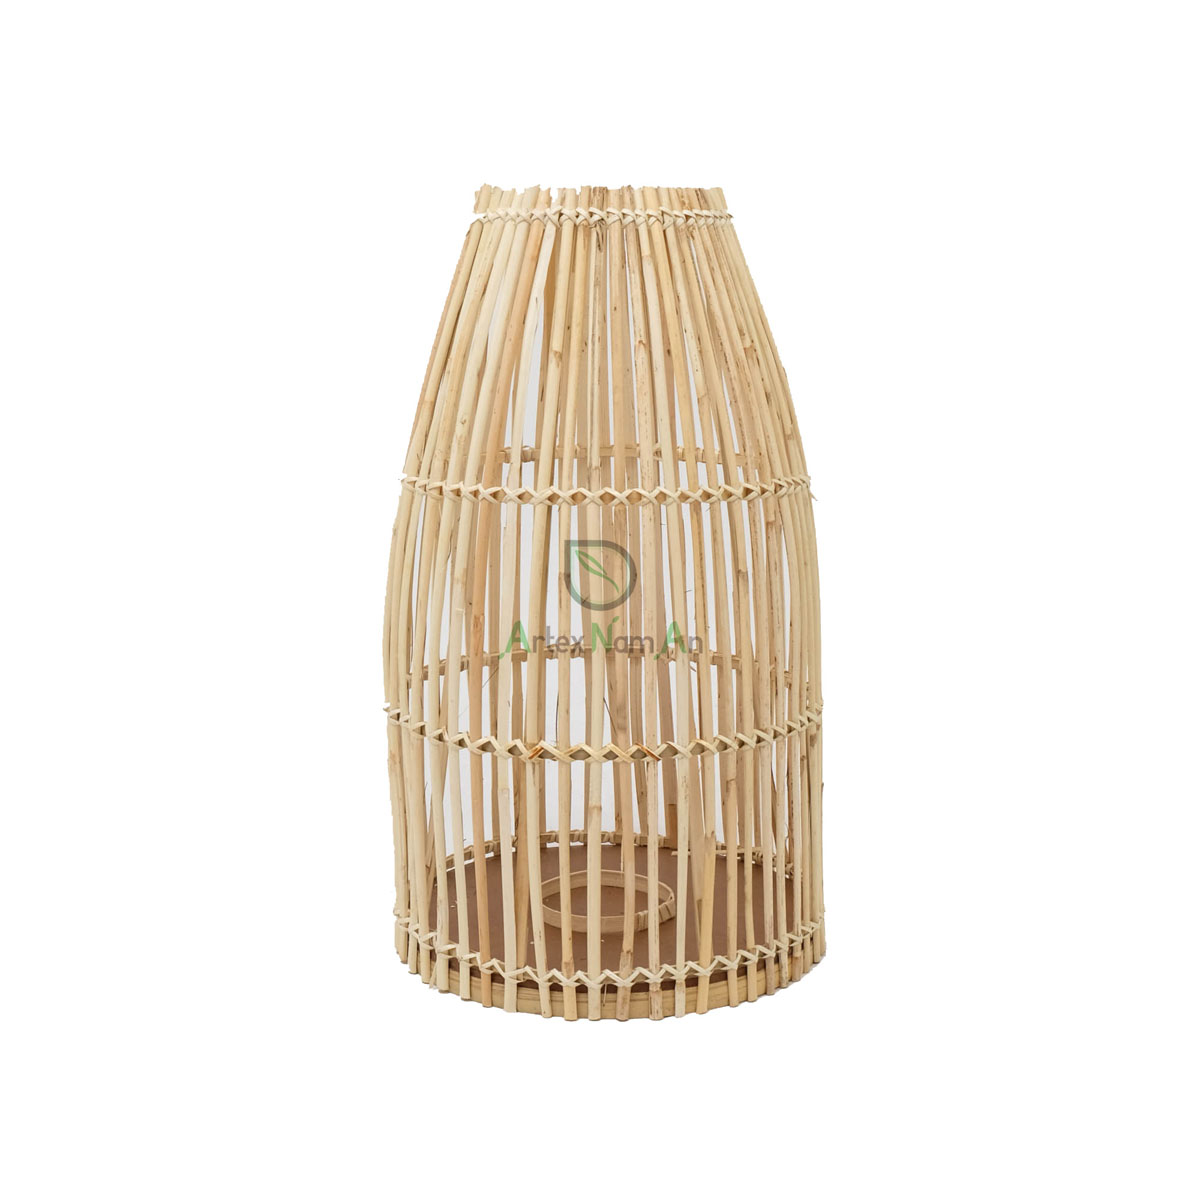 Best Selling Bamboo Lamp Shades With Natural Color R 17 21 001 01 L